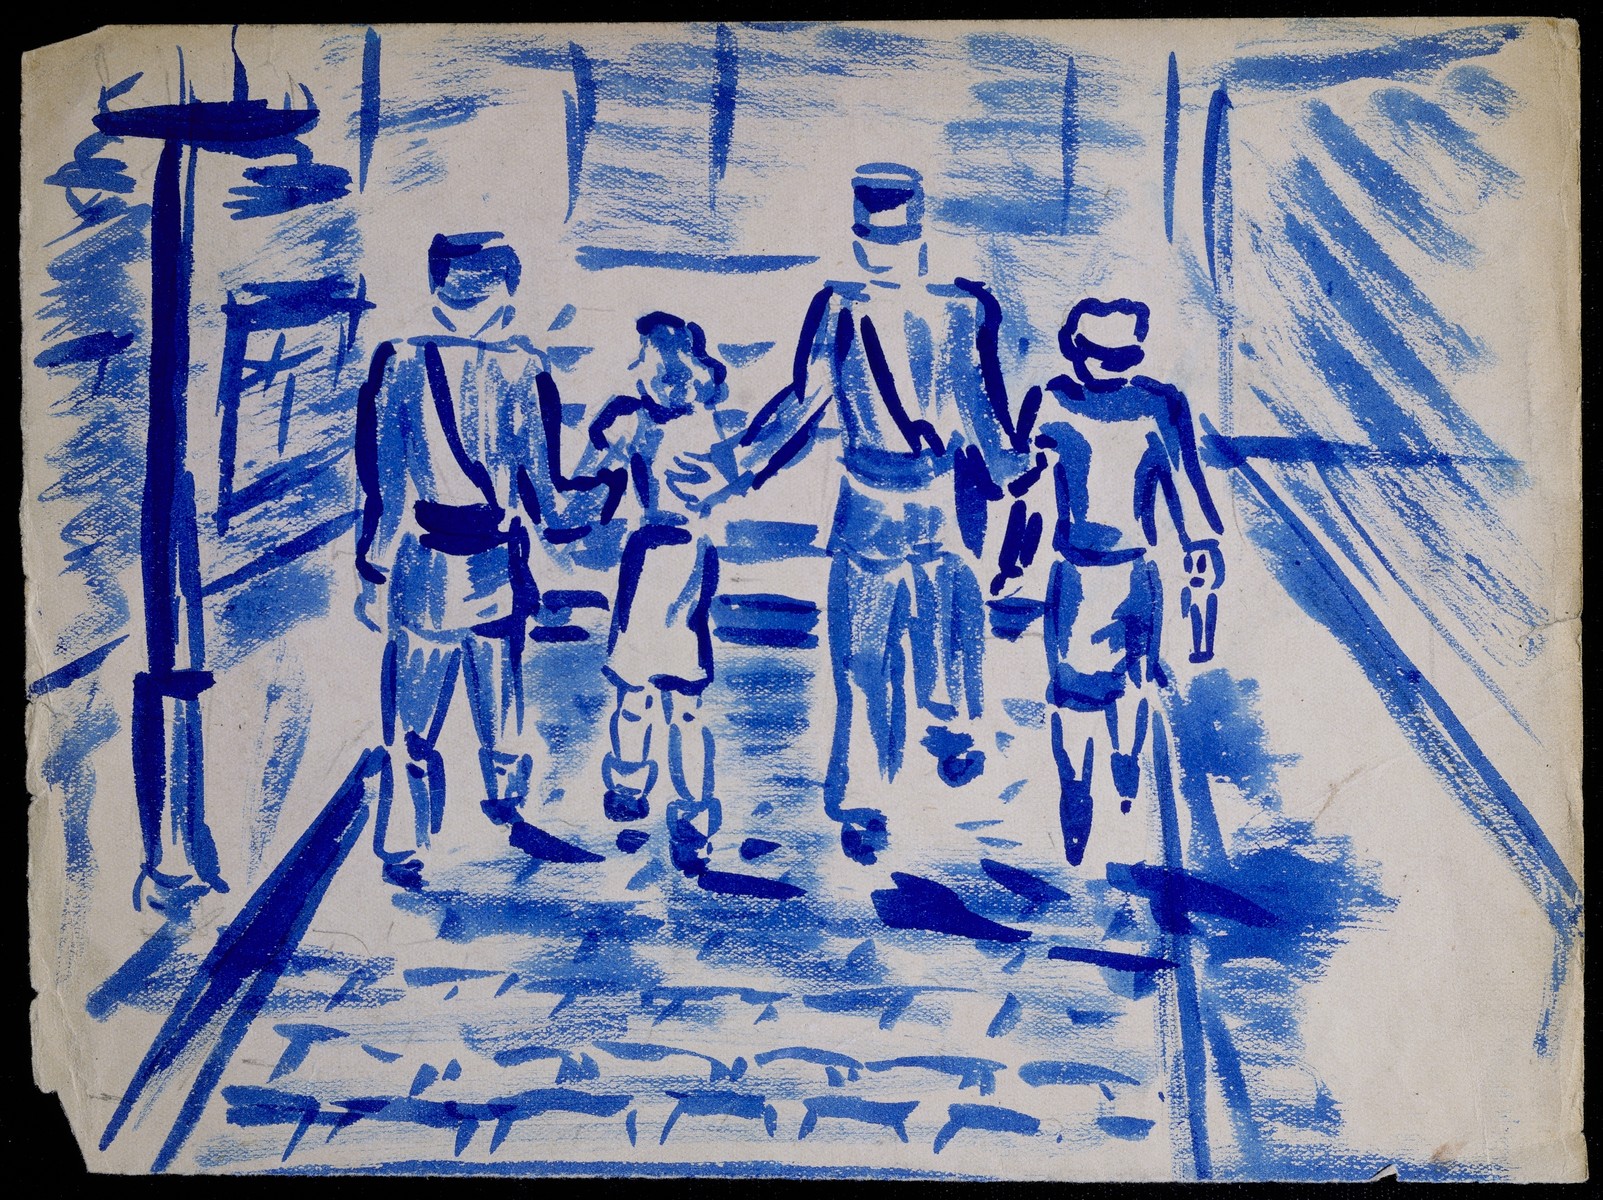 A page of a sketchbook created by Elizabeth Kaufmann during her stay in Nazi-occupied France.   The drawing in blue of a street scene with four figures is entitled "Elizabeth and her mother arrested by French gendarmes."